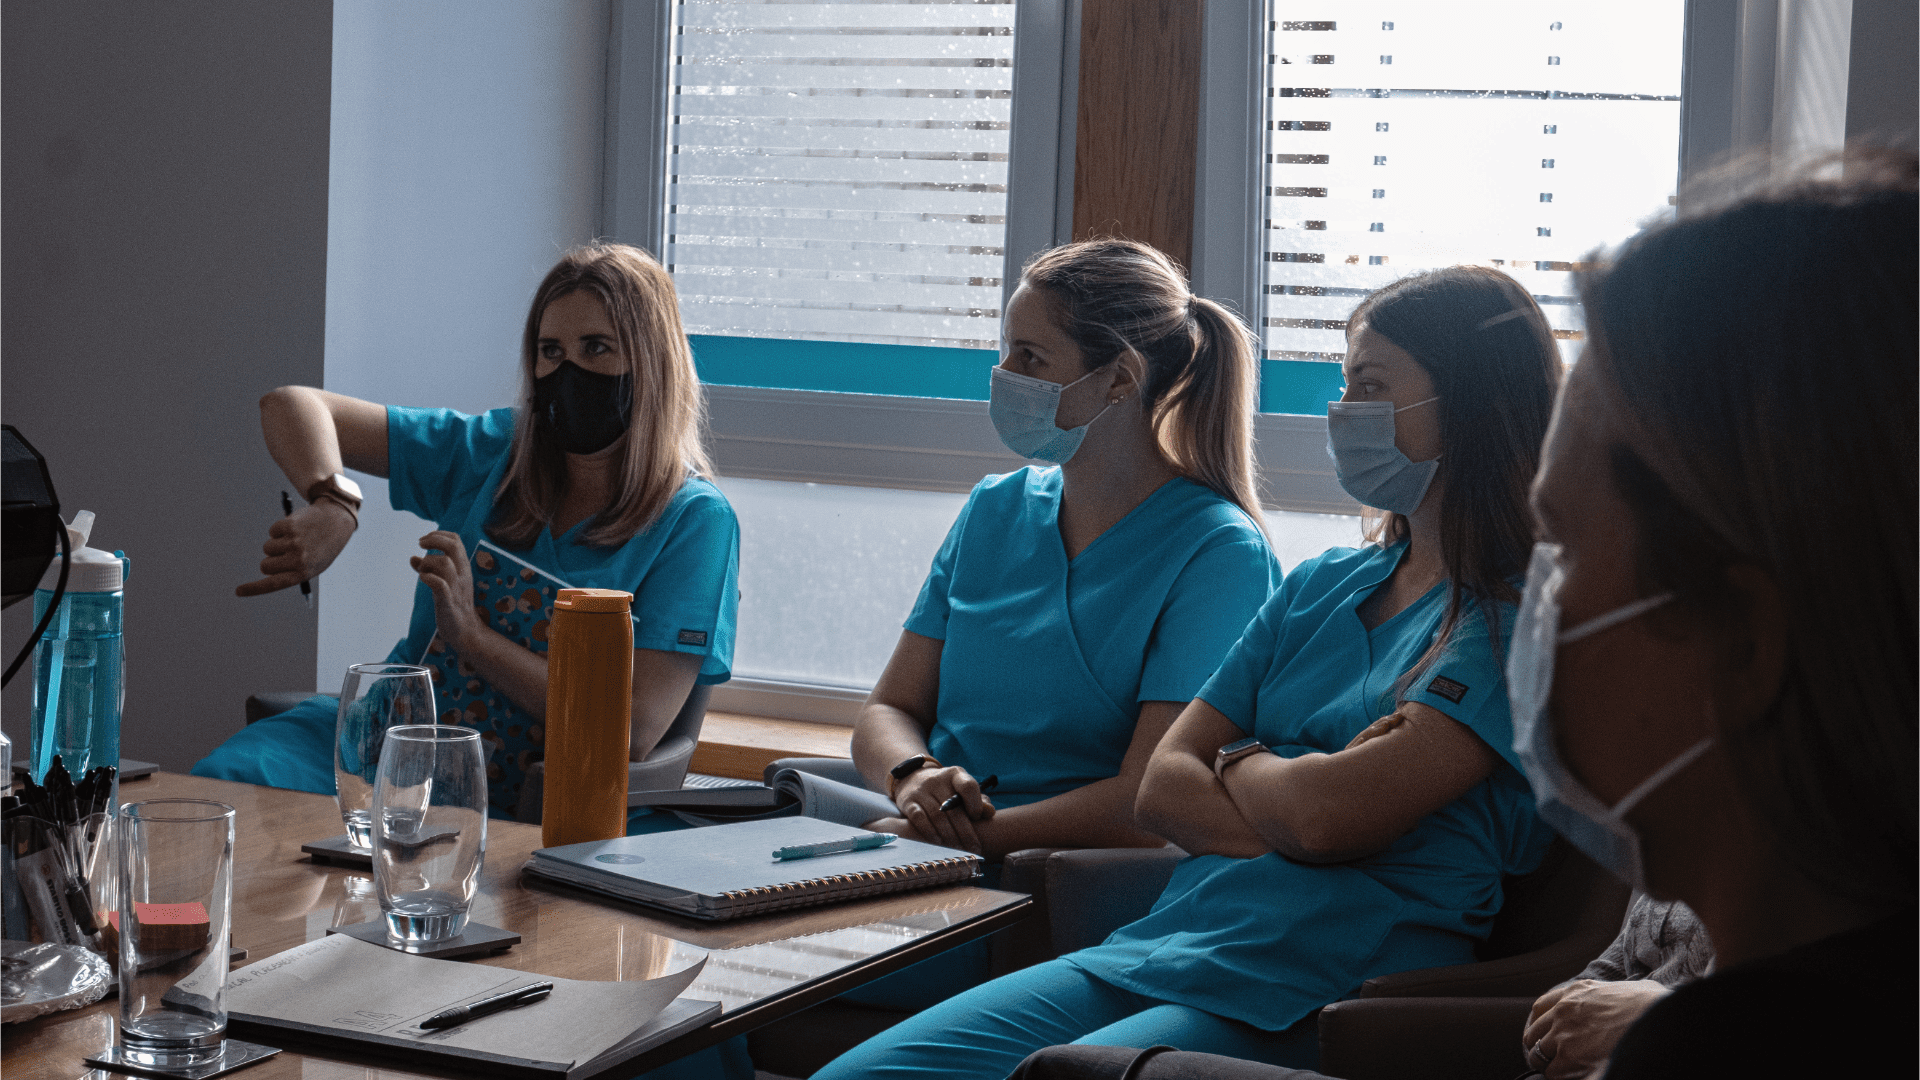 Four podiatrists discussing a patient's treatment for Morton's neuroma, a painful condition affecting the nerves between the toes.



